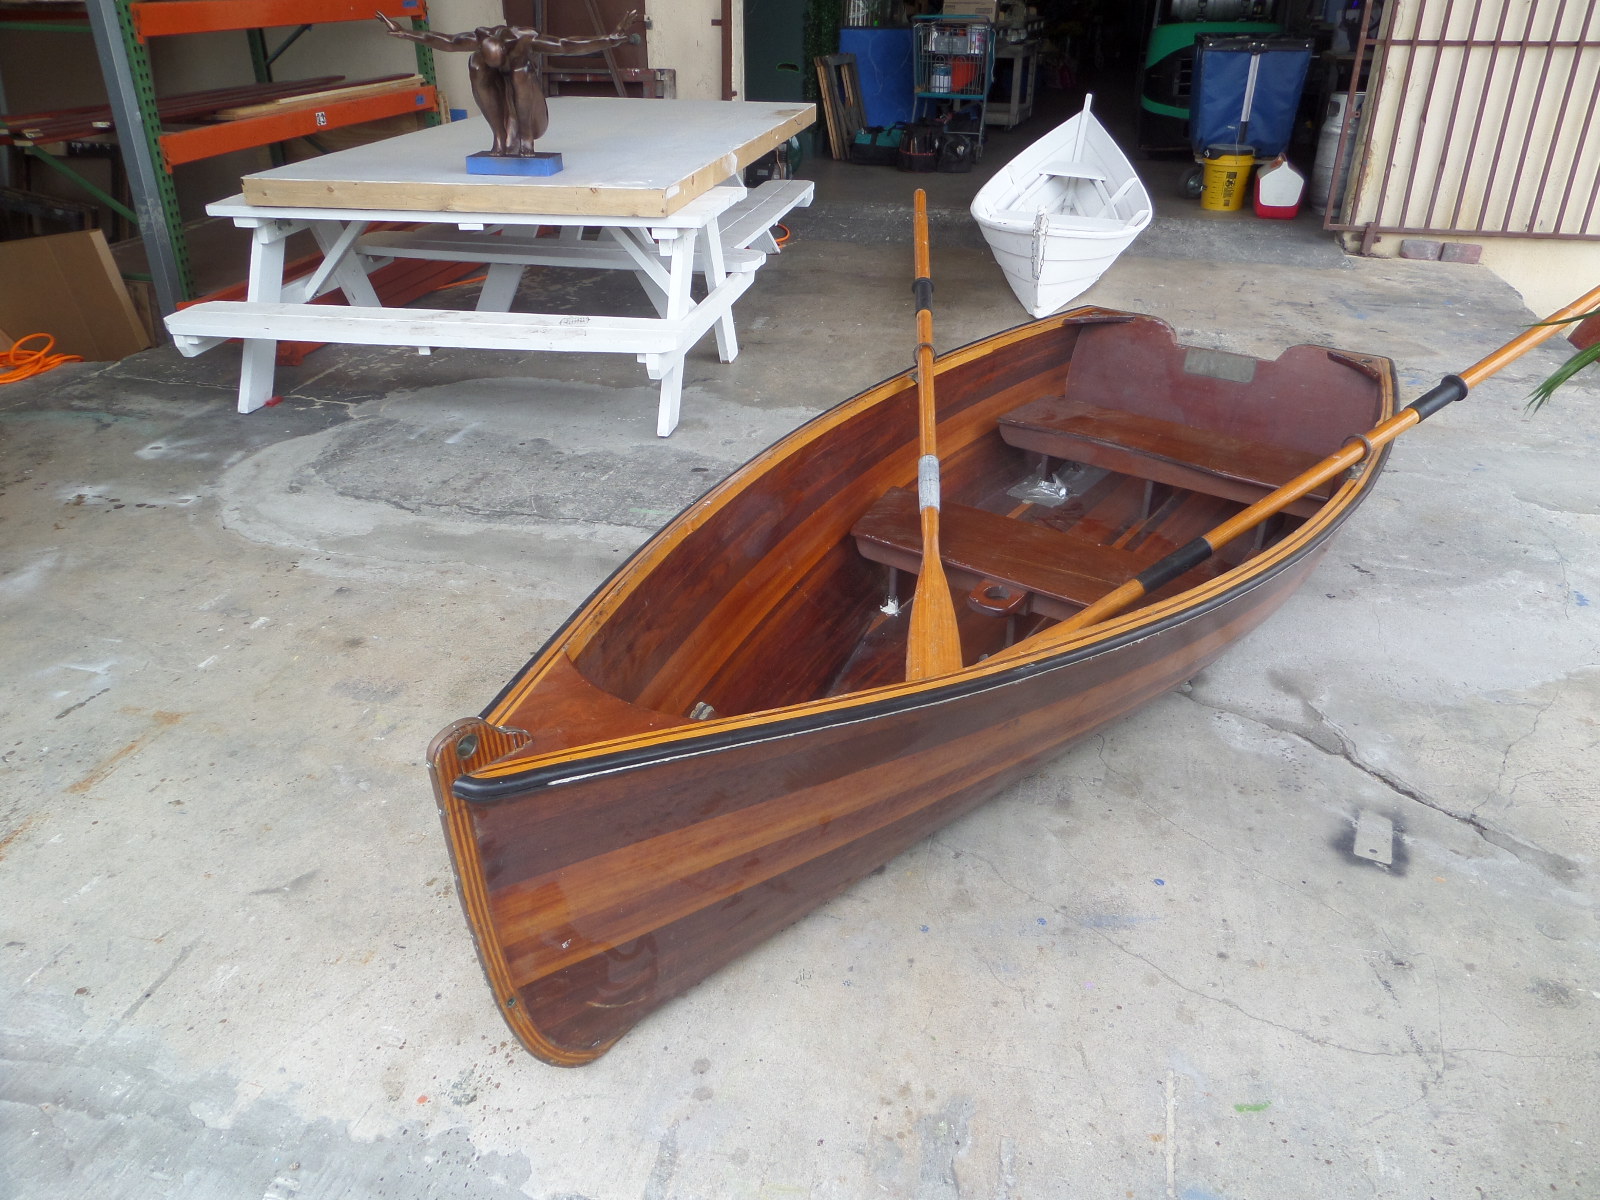 Classic Wooden Row Boat